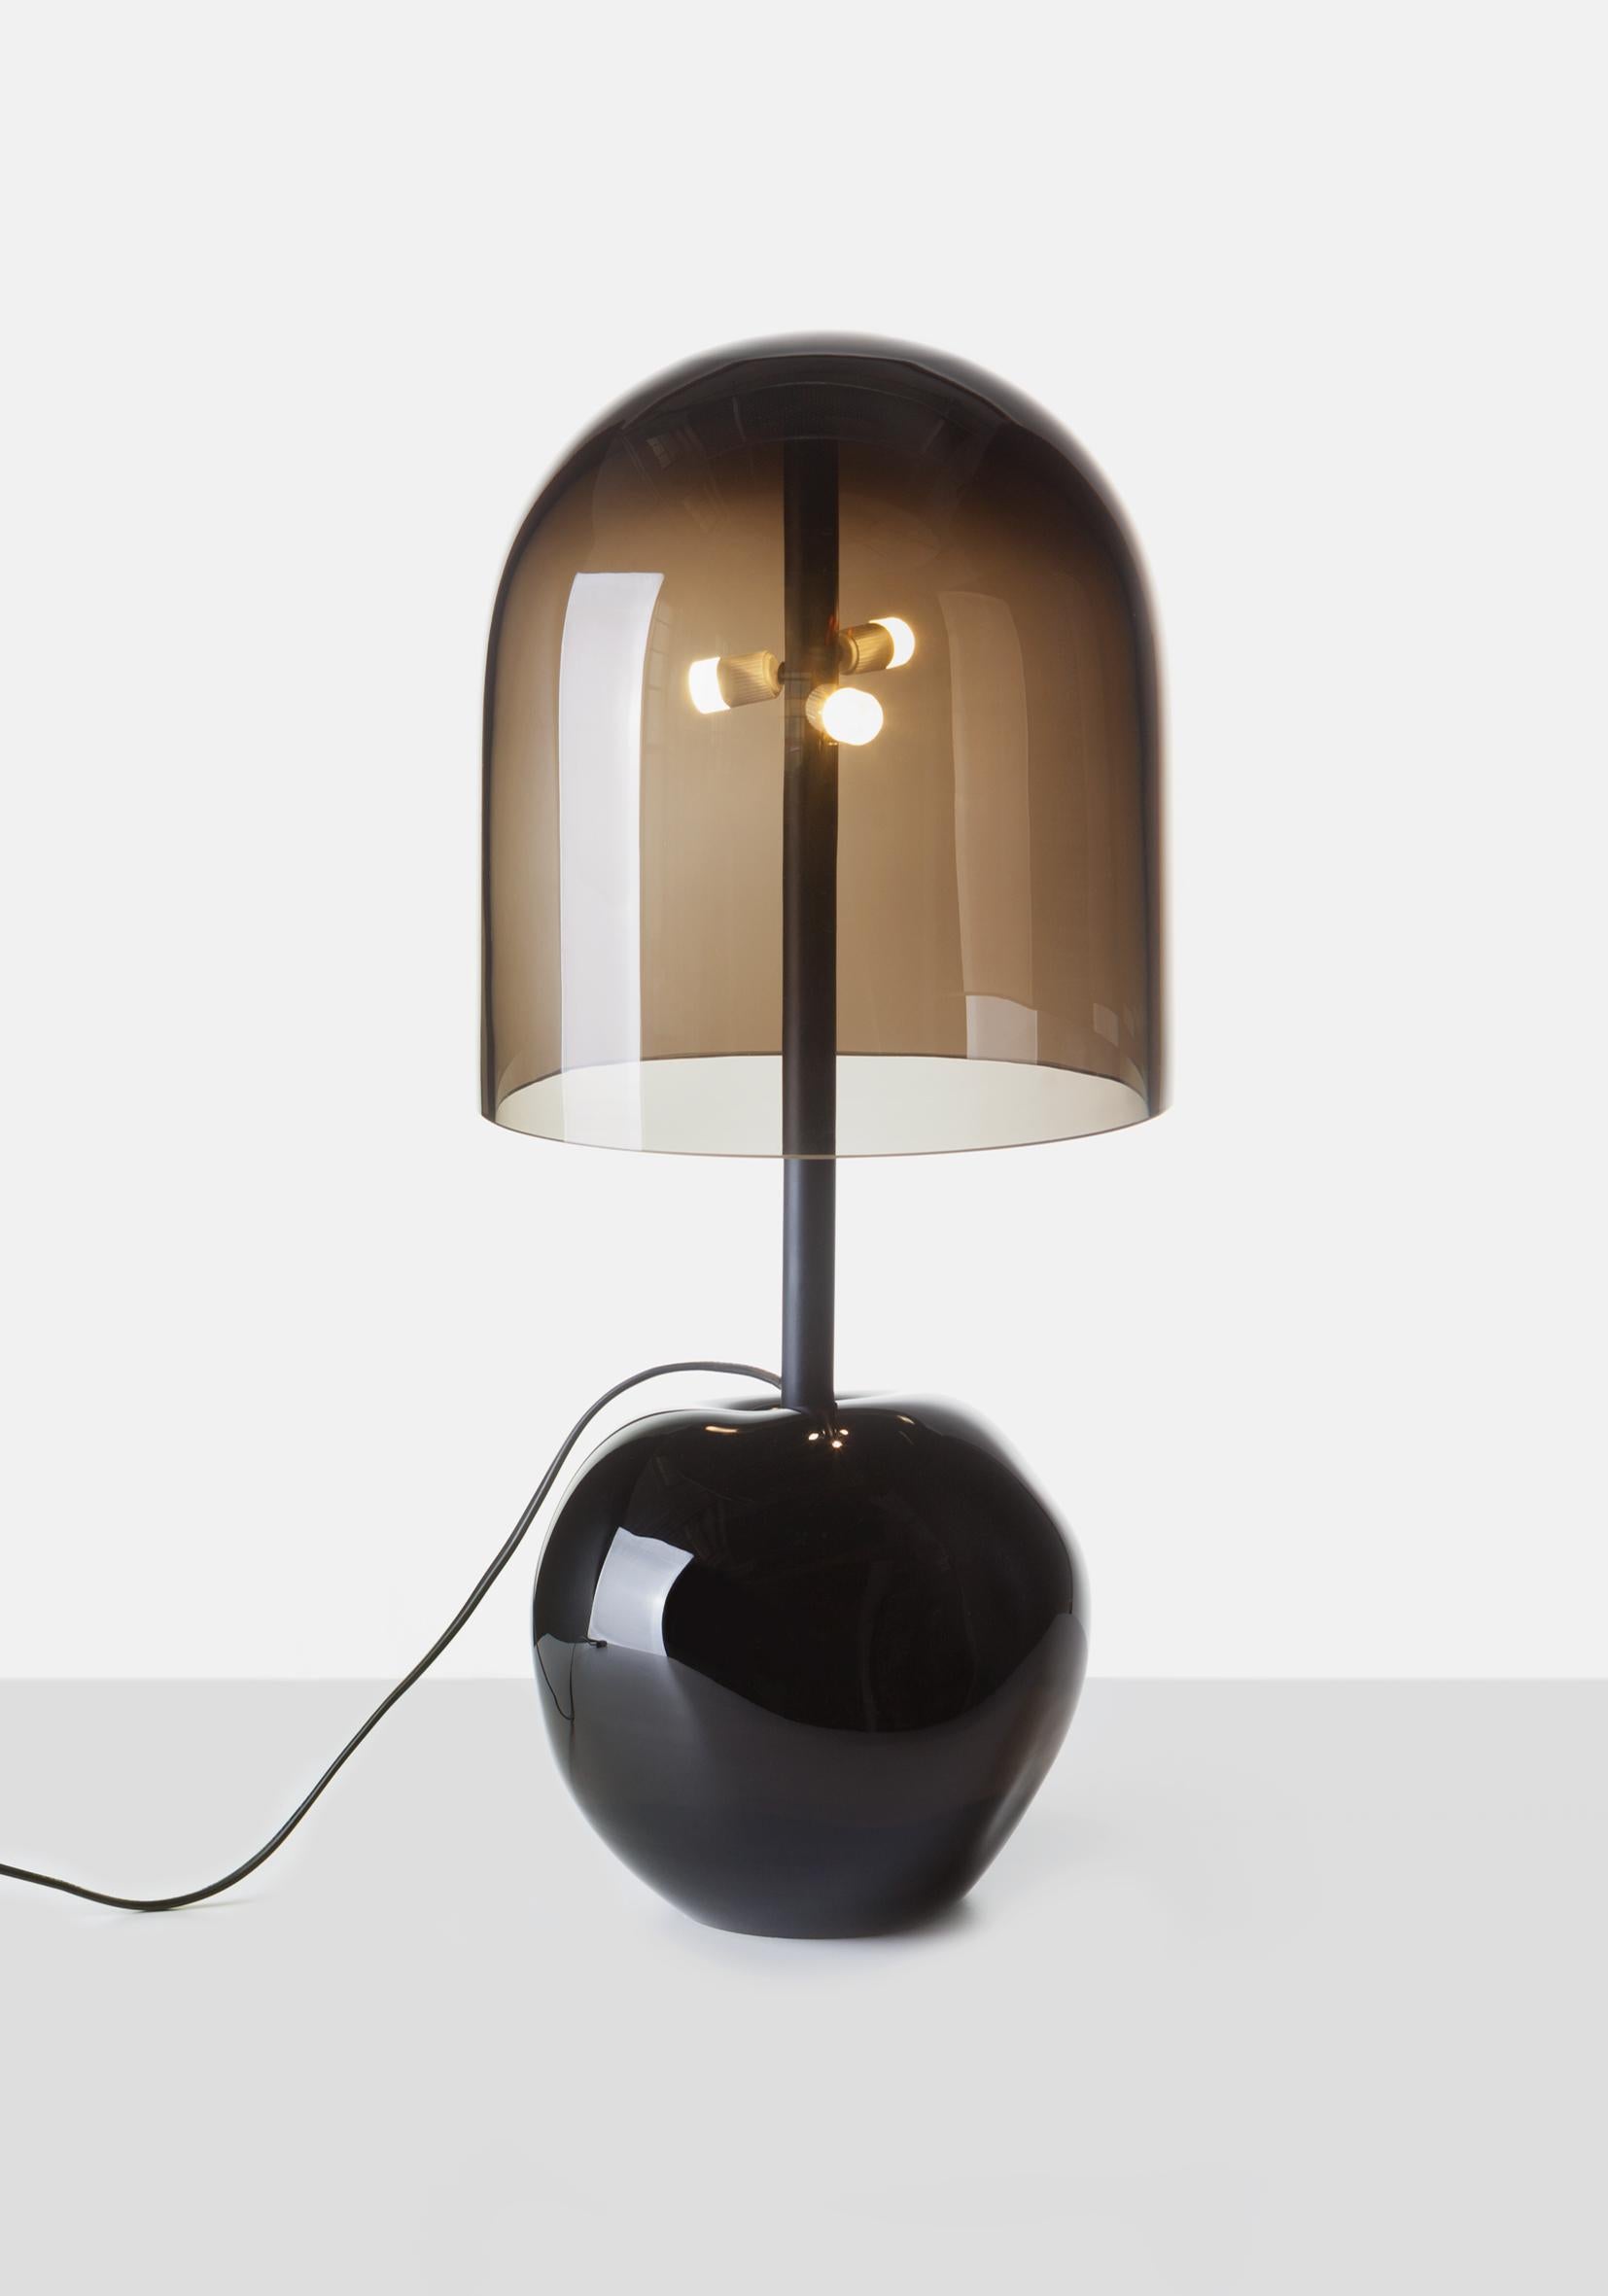 Antimatter floor lamp by Dechem Studio.
Dimensions: D 25 x H 55 cm.
Materials: glass, metal.

The massive, heavy and irregular black volume of the base contrasts with the light and precise glass dome of the shade. Black and smoke grey glass